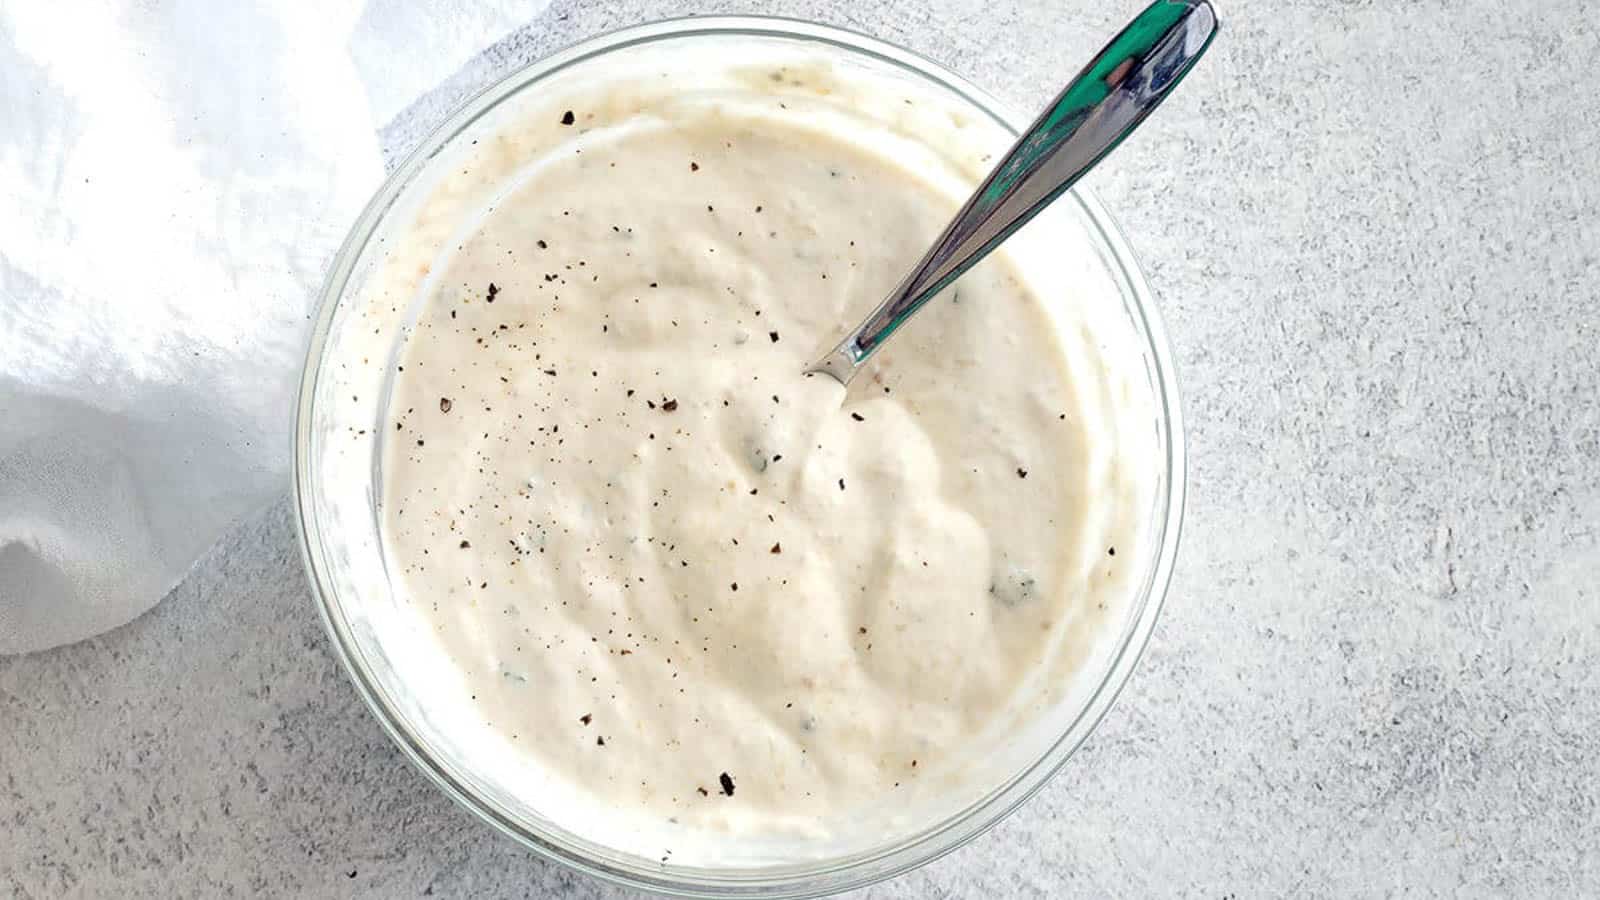 Horseradish sauce in a clear bowl with a silver spoon dipped inside.